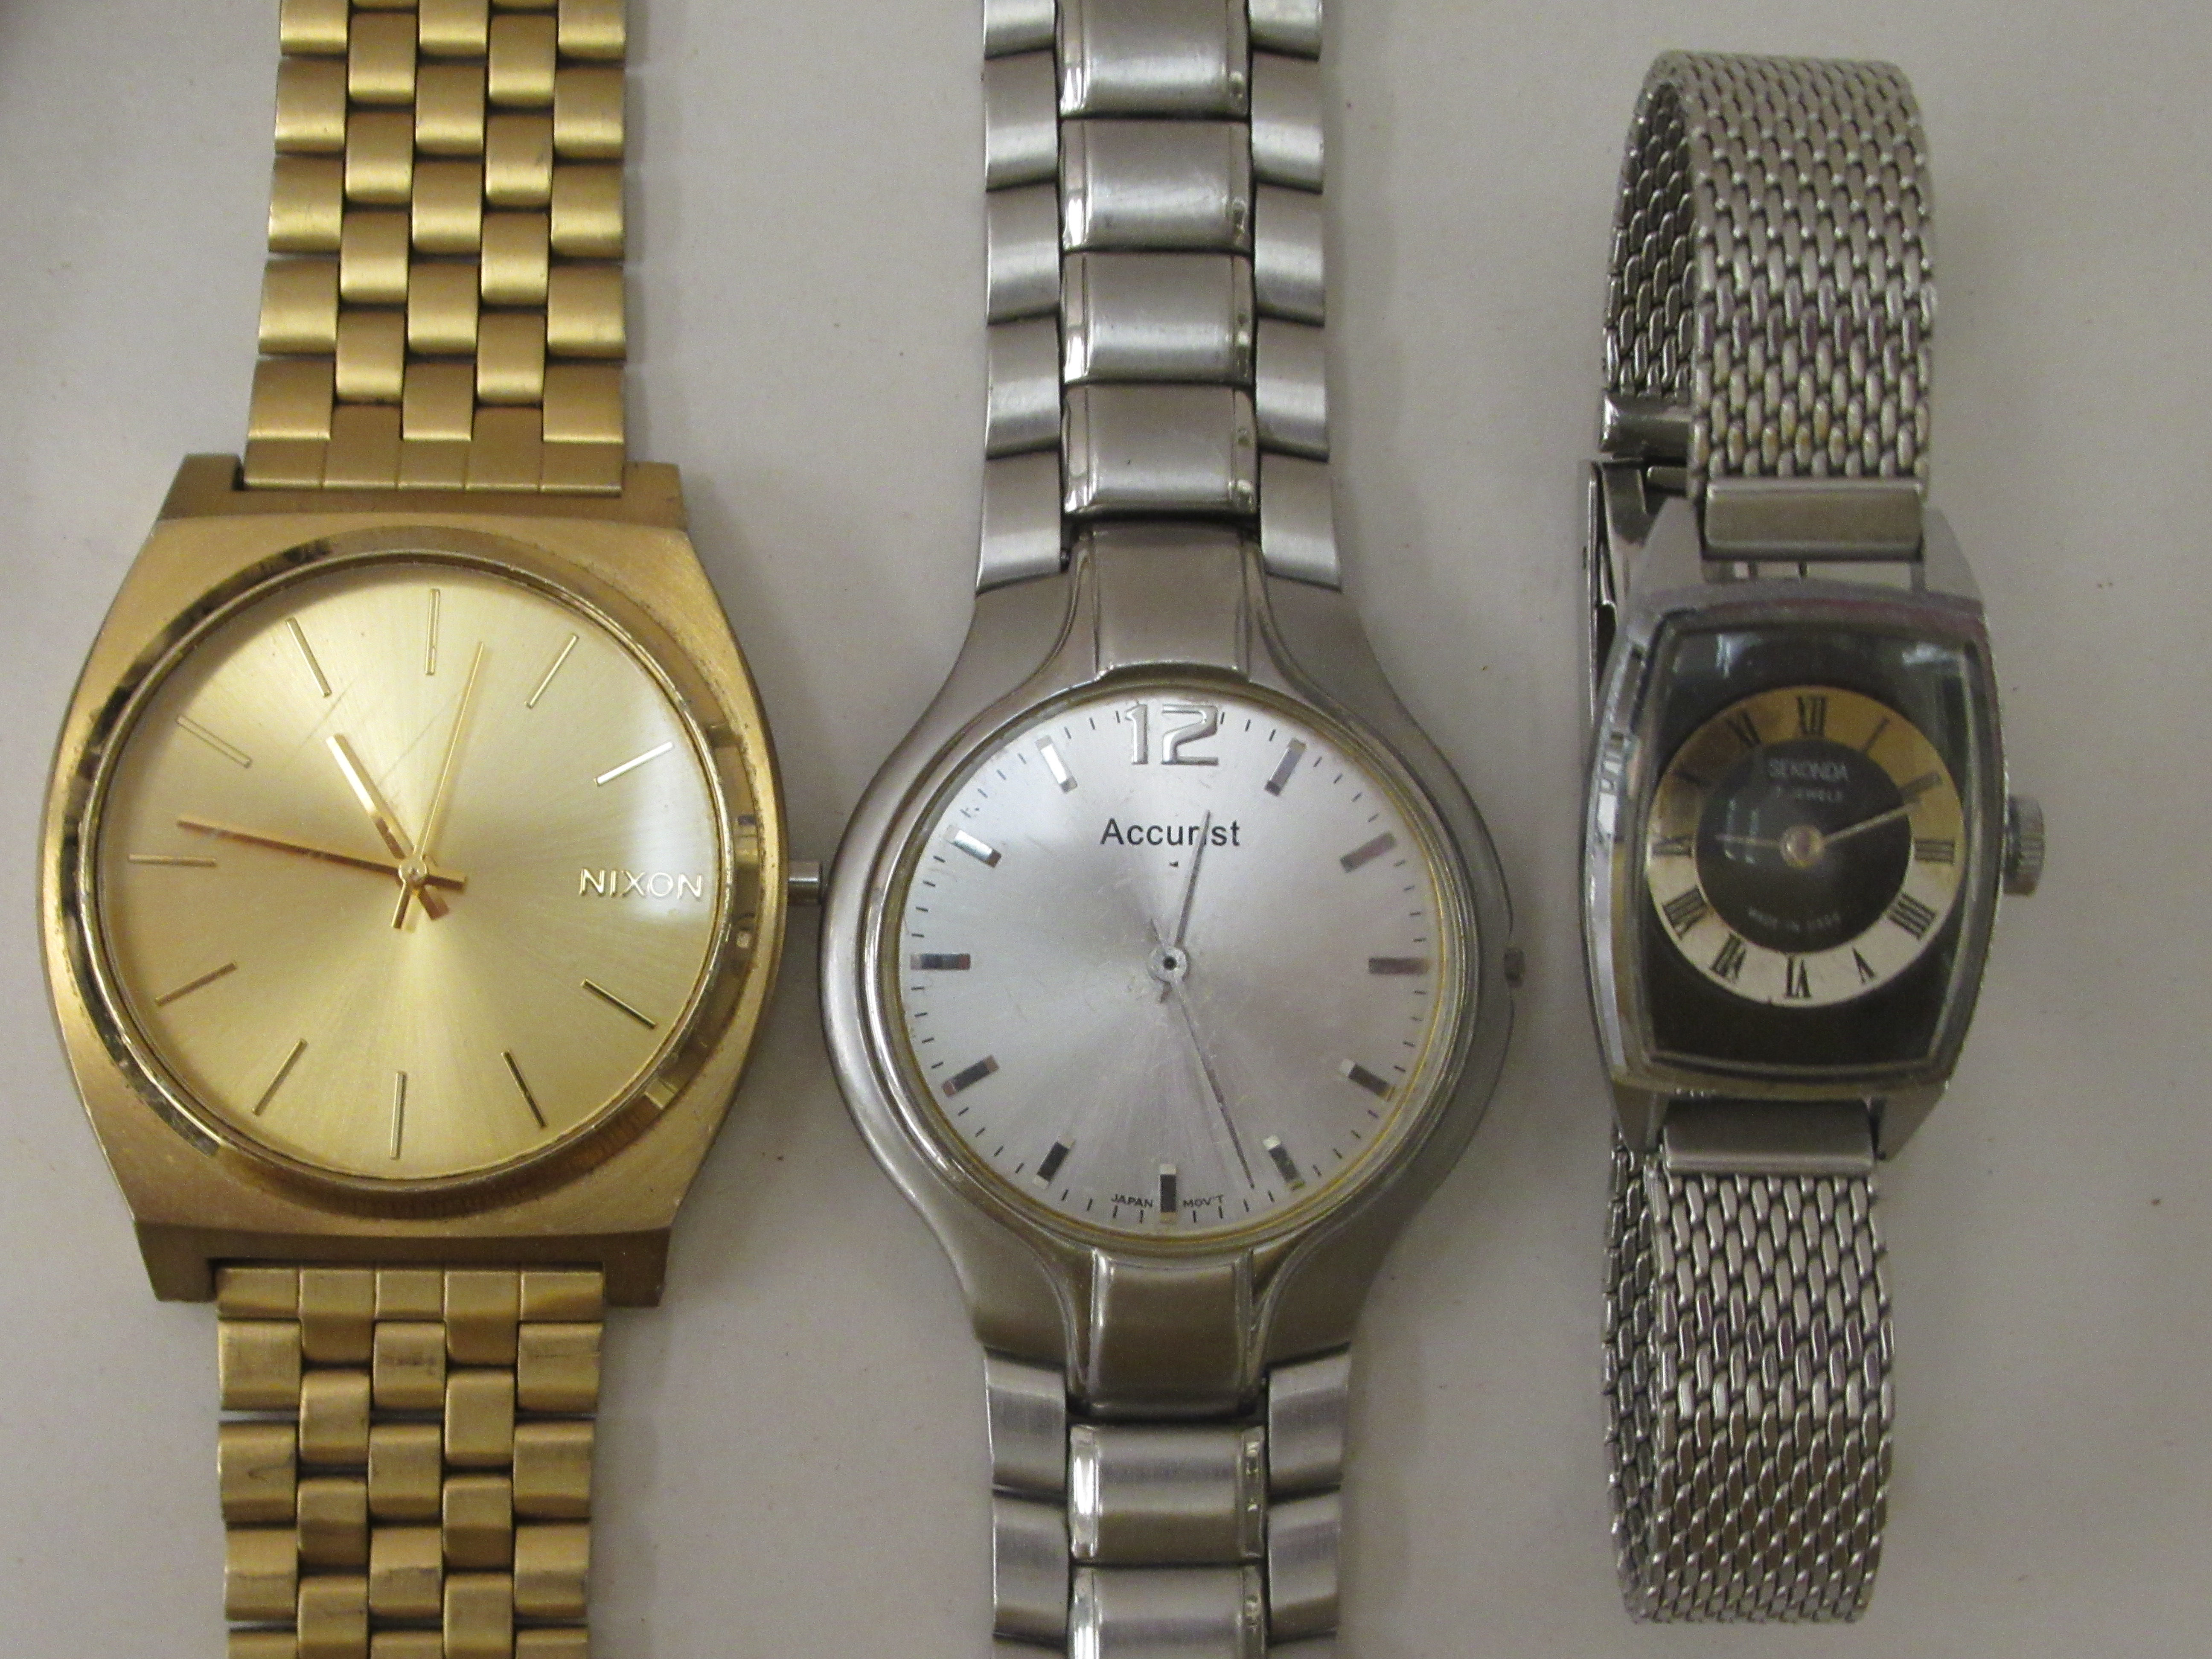 Wristwatches: to include a stainless steel cased accuristic, faced by a baton dial - Image 4 of 4